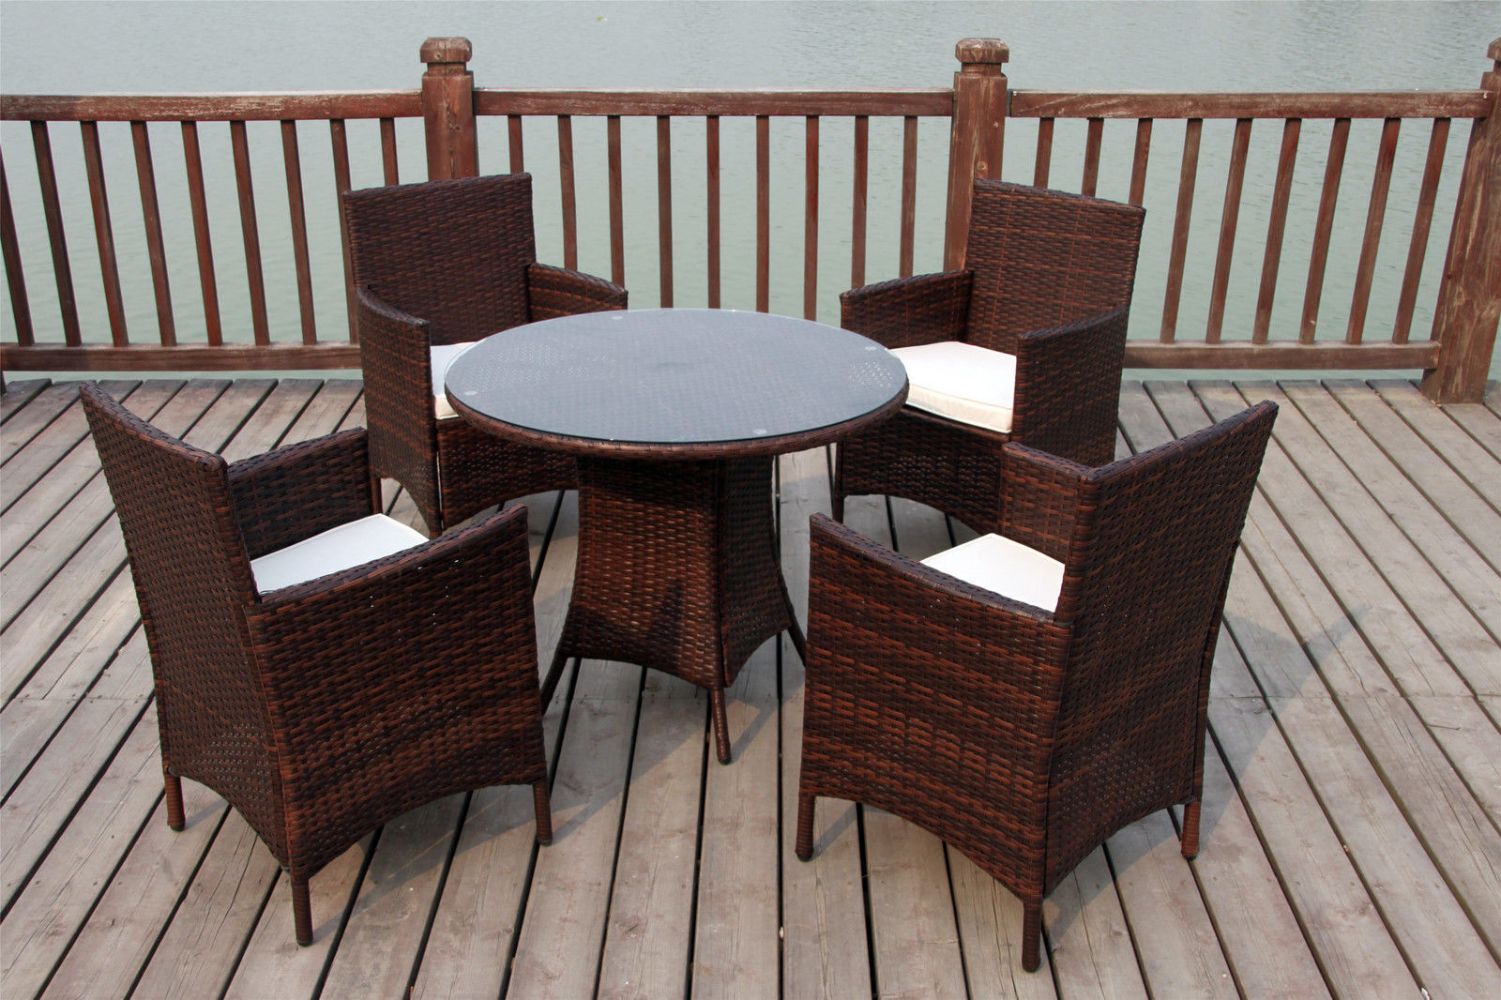 Brand New Rattan Garden Furniture: Exclusive Range Including Dining Sets, Sofa Sets, Sun Loungers and More